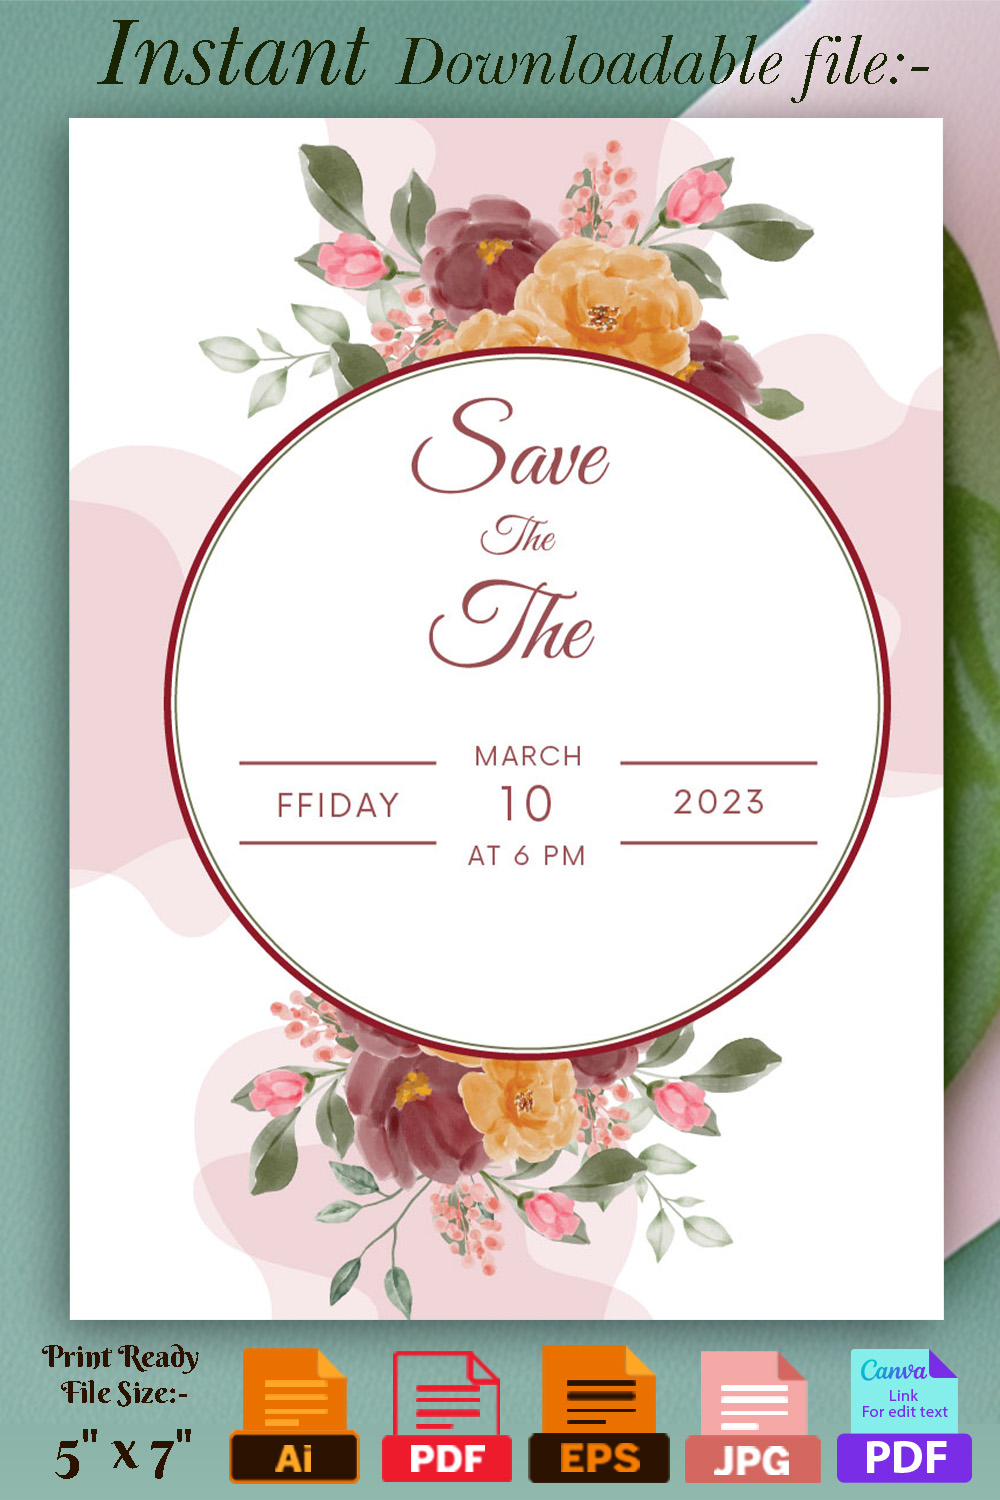 Image with beautiful wedding invitation with floral design.